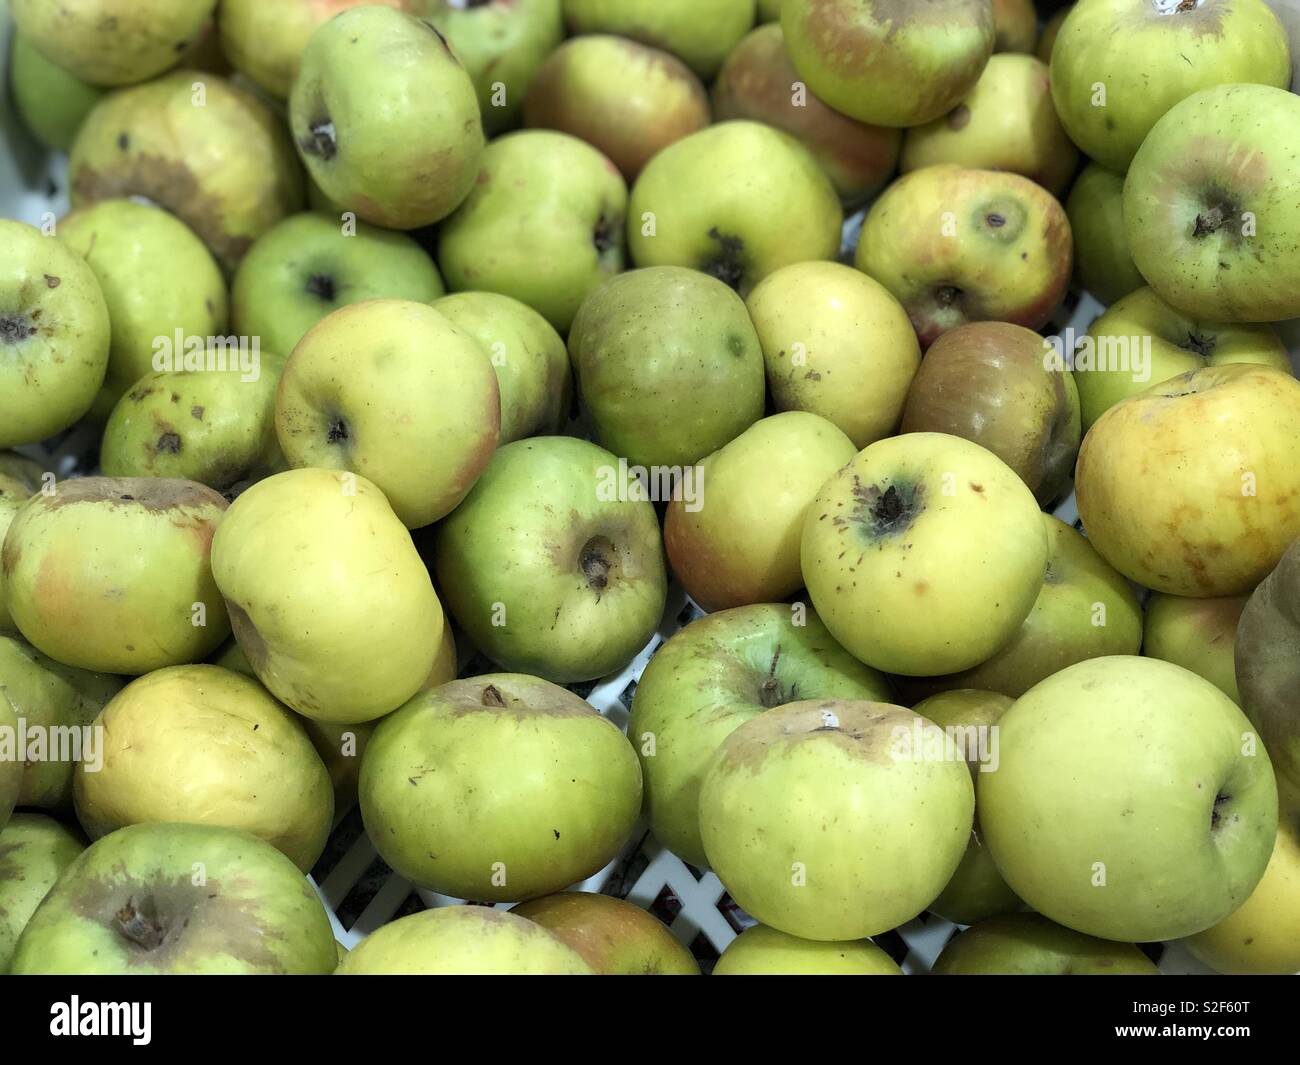 Pink apples from Sibillini mountains, Marche region, Italy Stock Photo